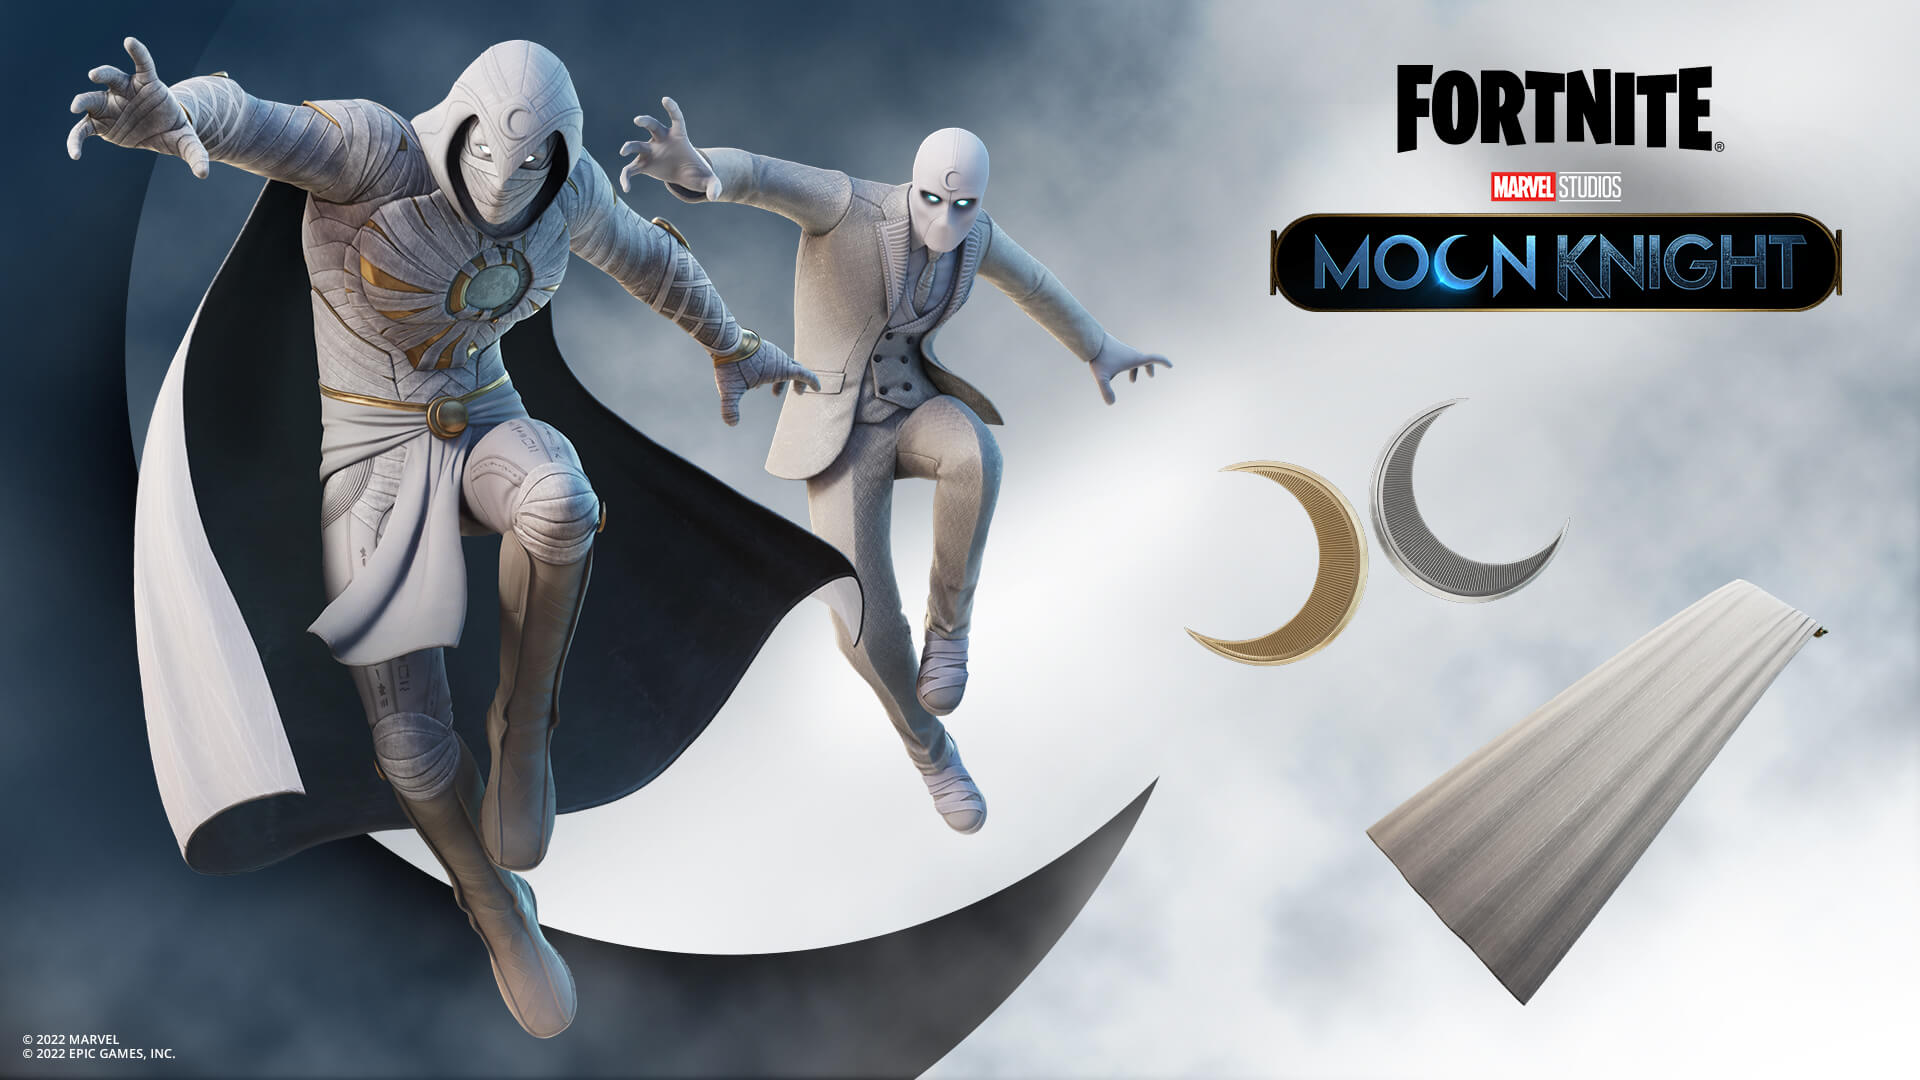 Fortnite moon knight skin and pickaxe